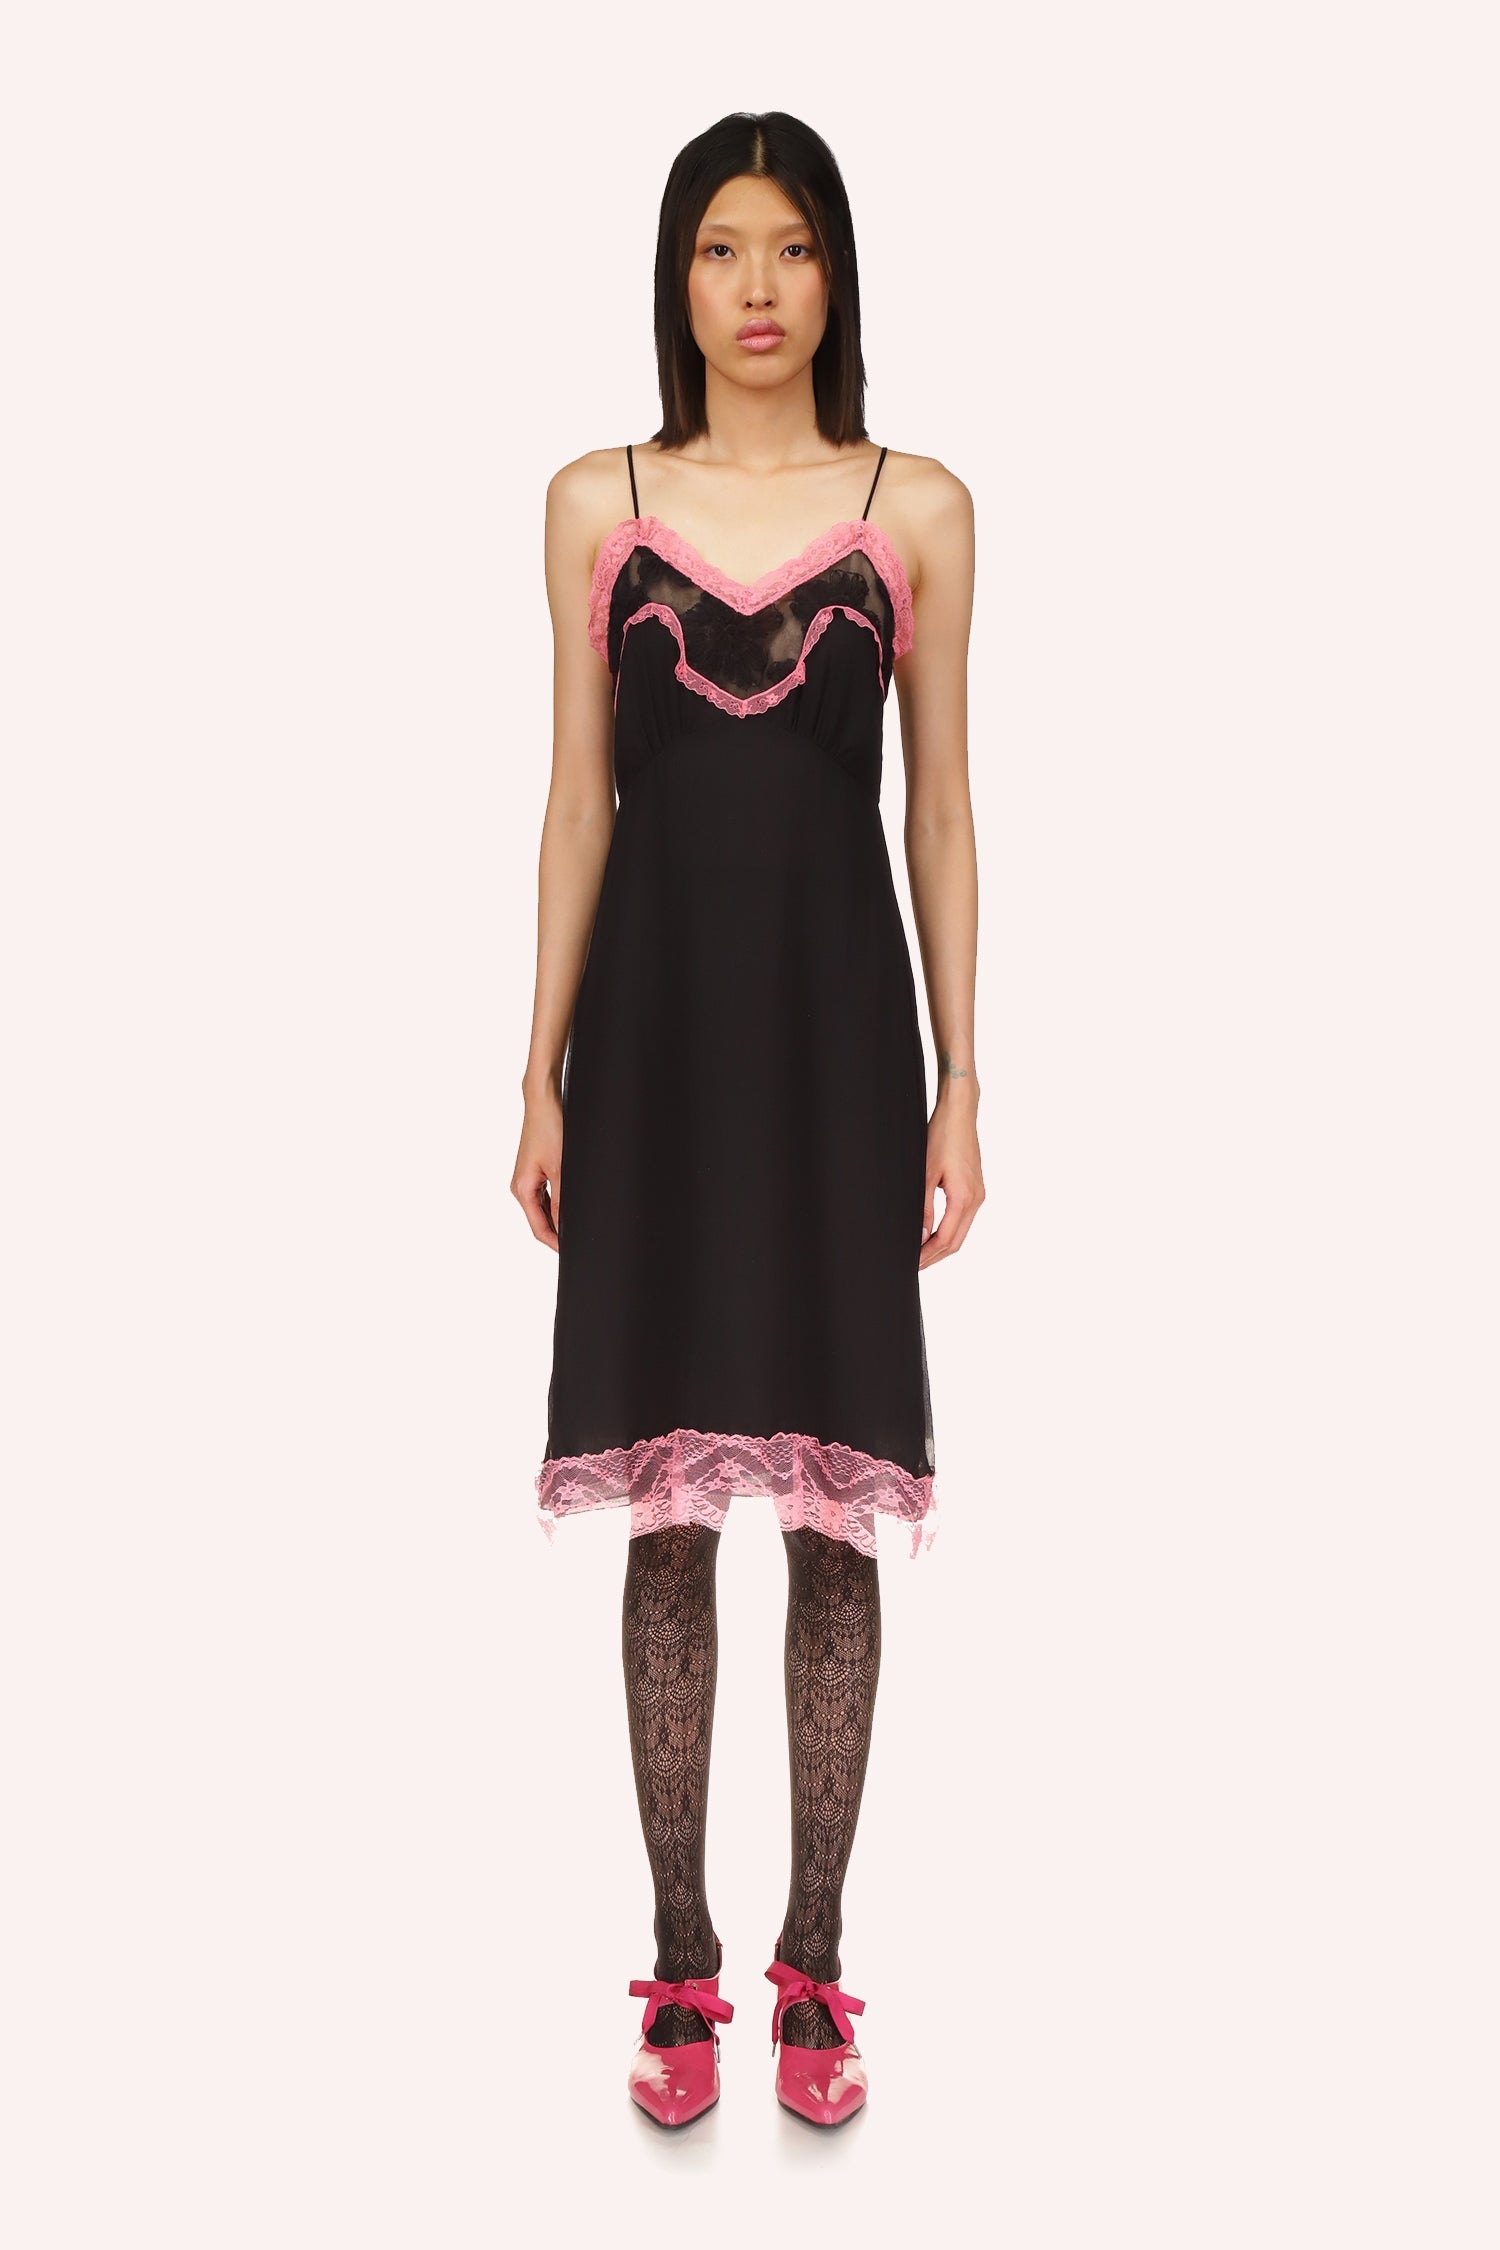 The Lingerie Chiffon Slip Dress Rose, by Anna Sui, offers a dress, black with rose highlight lace a top and bottom